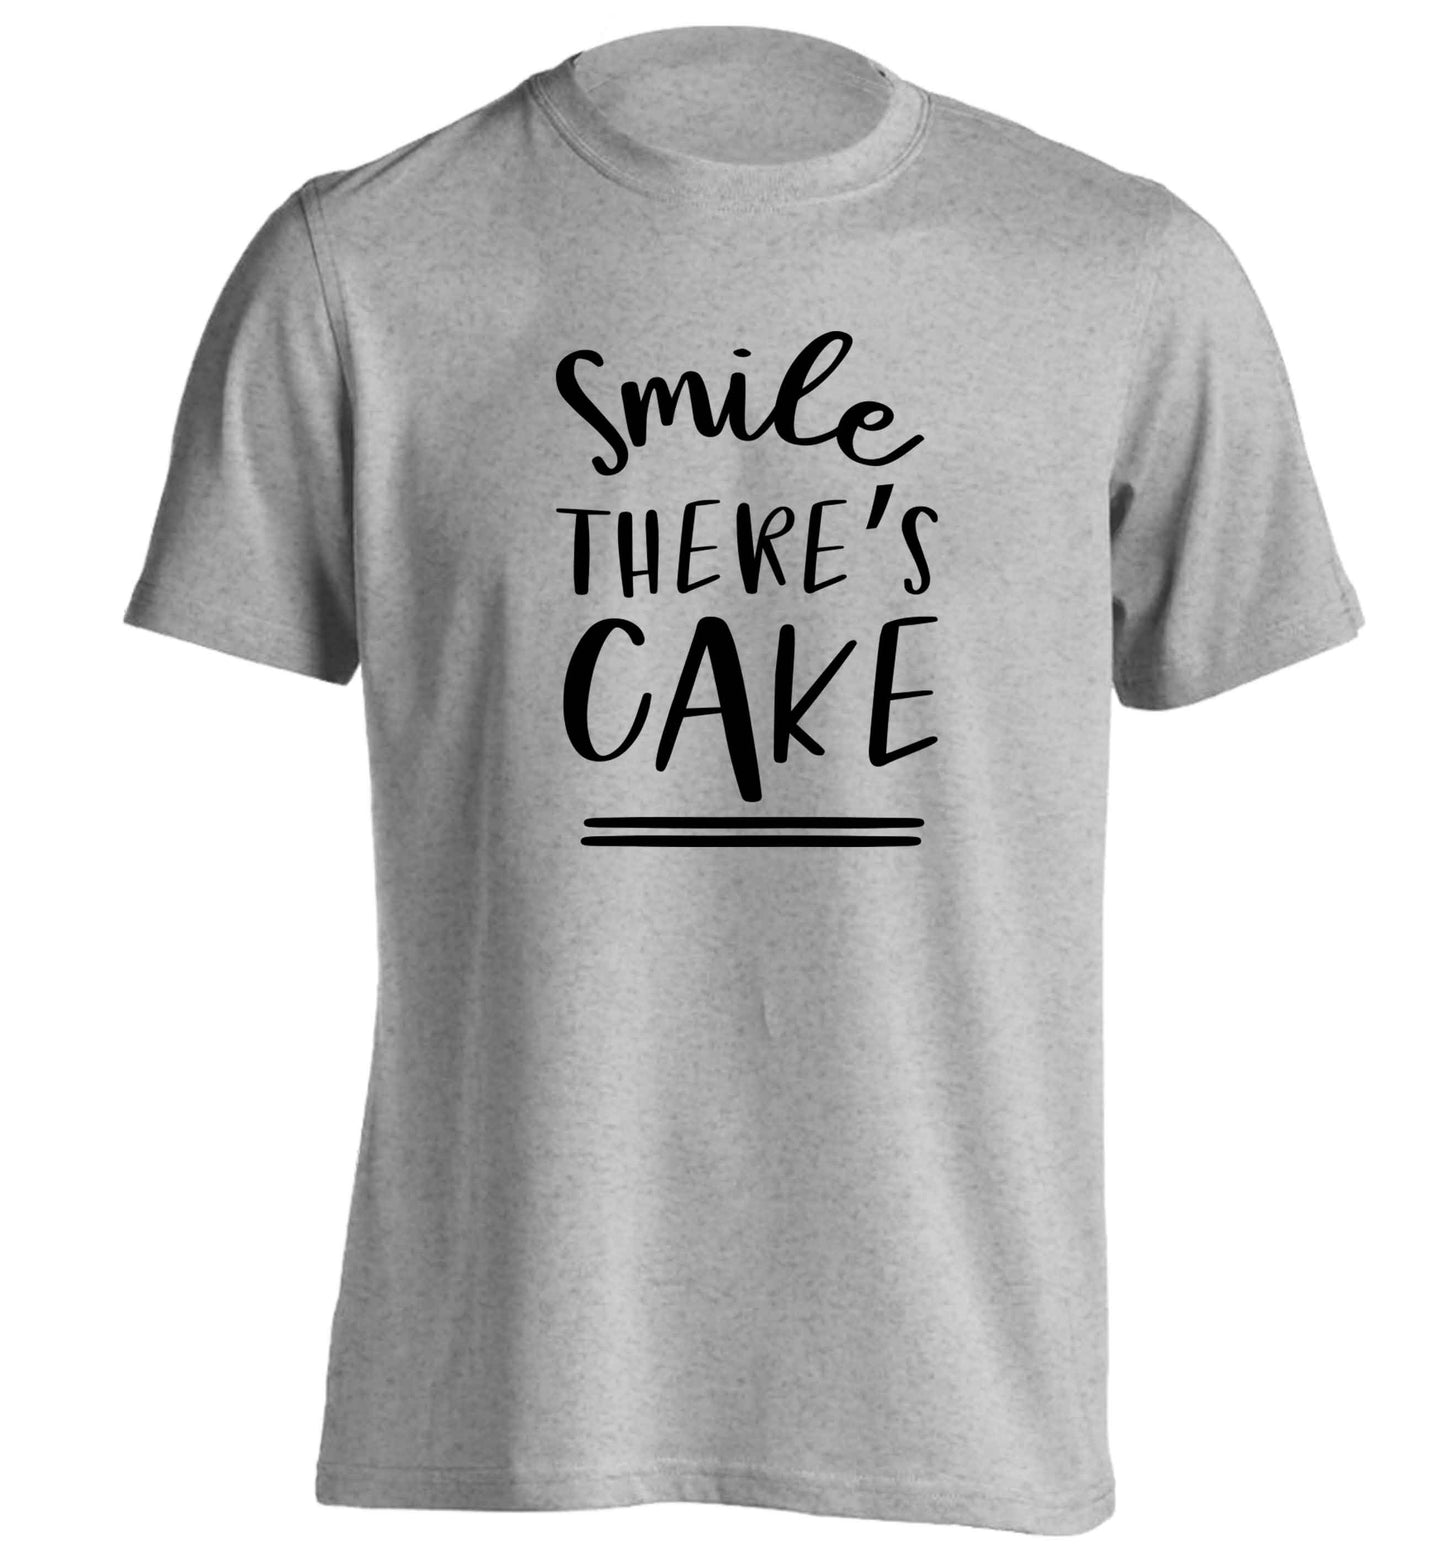 Smile there's cake adults unisex grey Tshirt 2XL